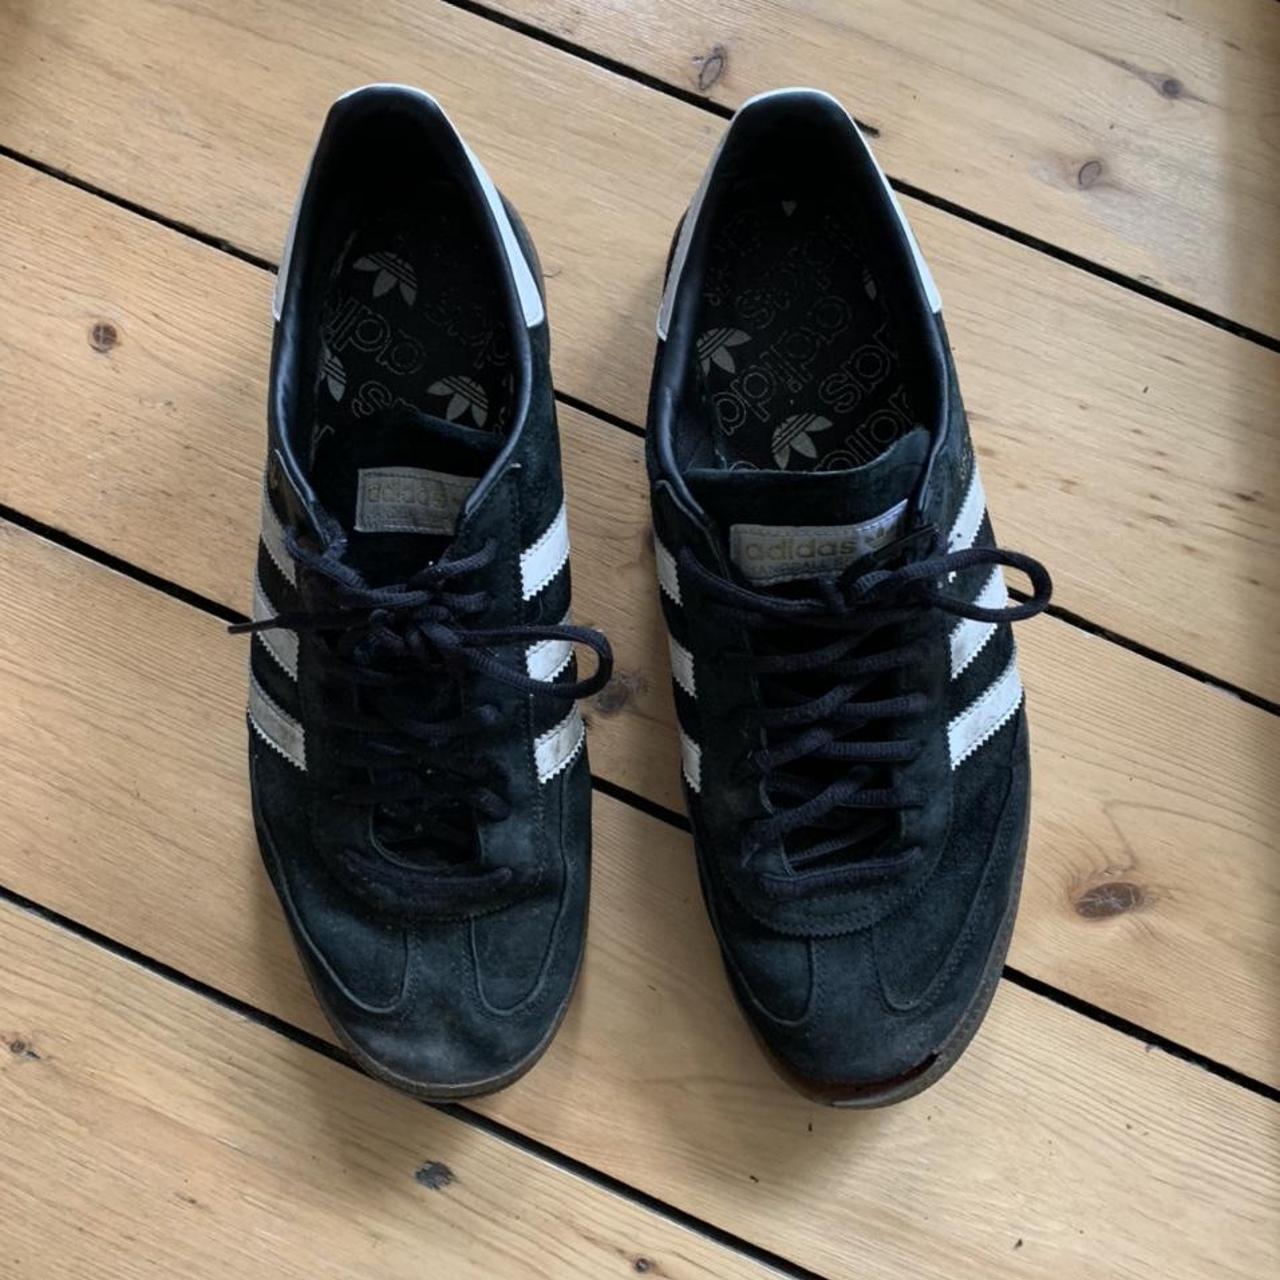 Adidas Spezial. Mens UK 10.5. Used condition and... - Depop